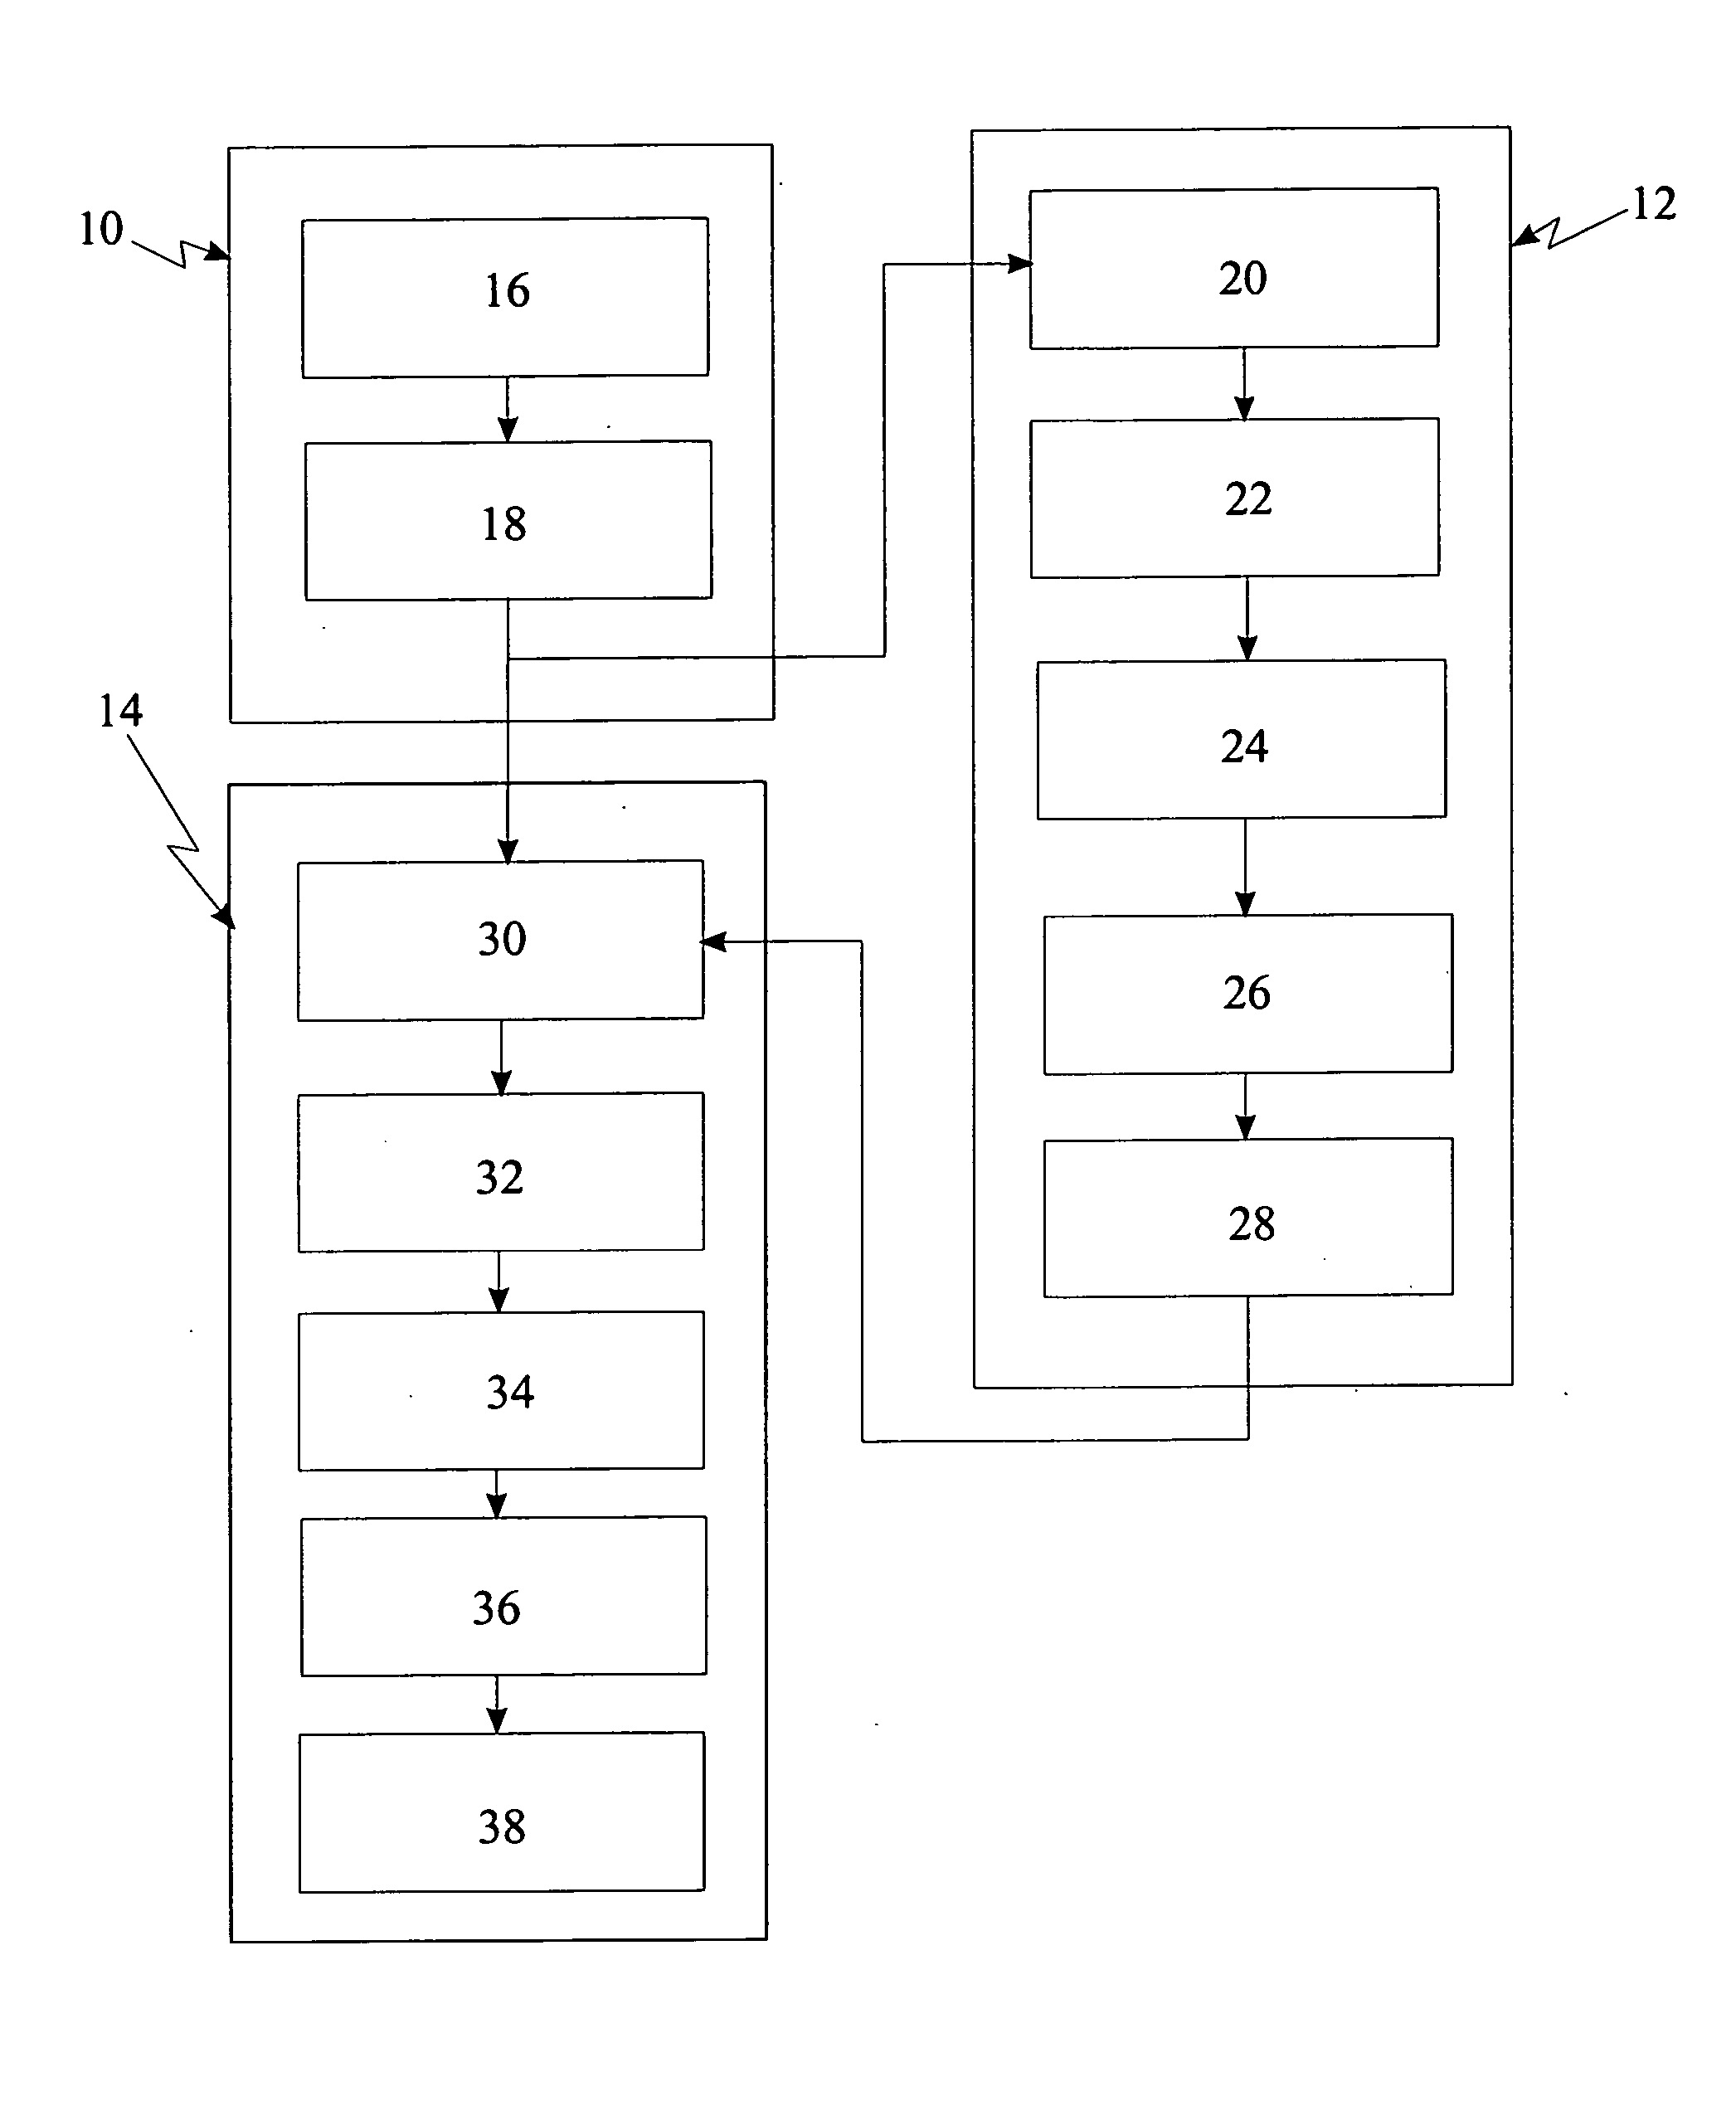 Authentication system executing an elliptic curve digital signature cryptographic process